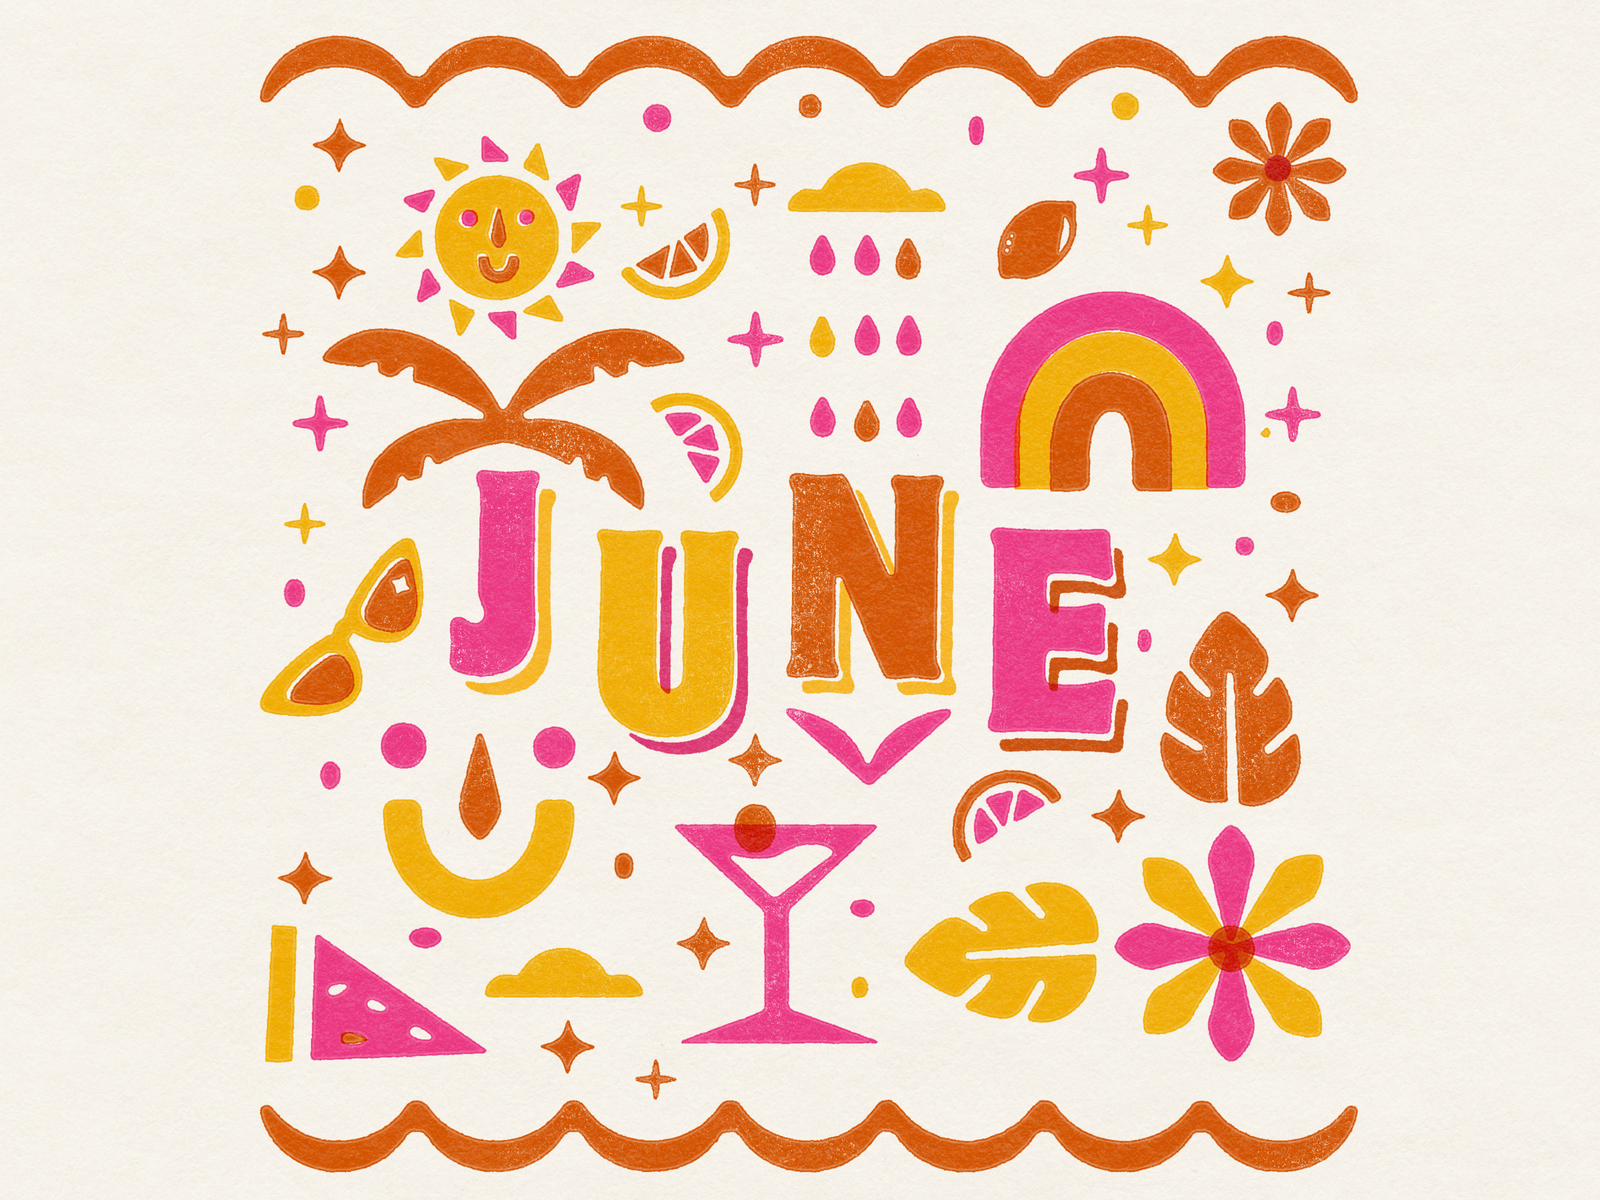 June Illustration by Madeleine McMichael on Dribbble